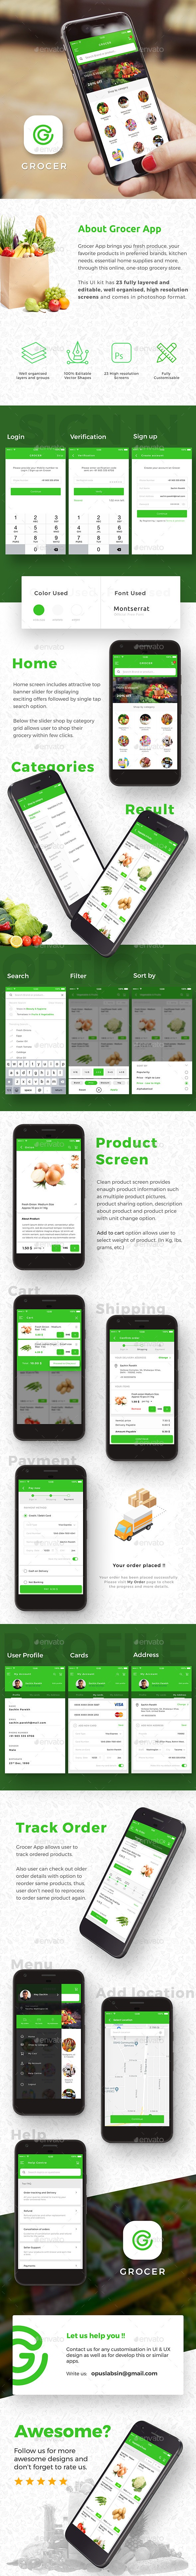 Grocery Ordering & Delivery App UI | Grocery Business UI | Online Grocery App UI Kit | Grocer